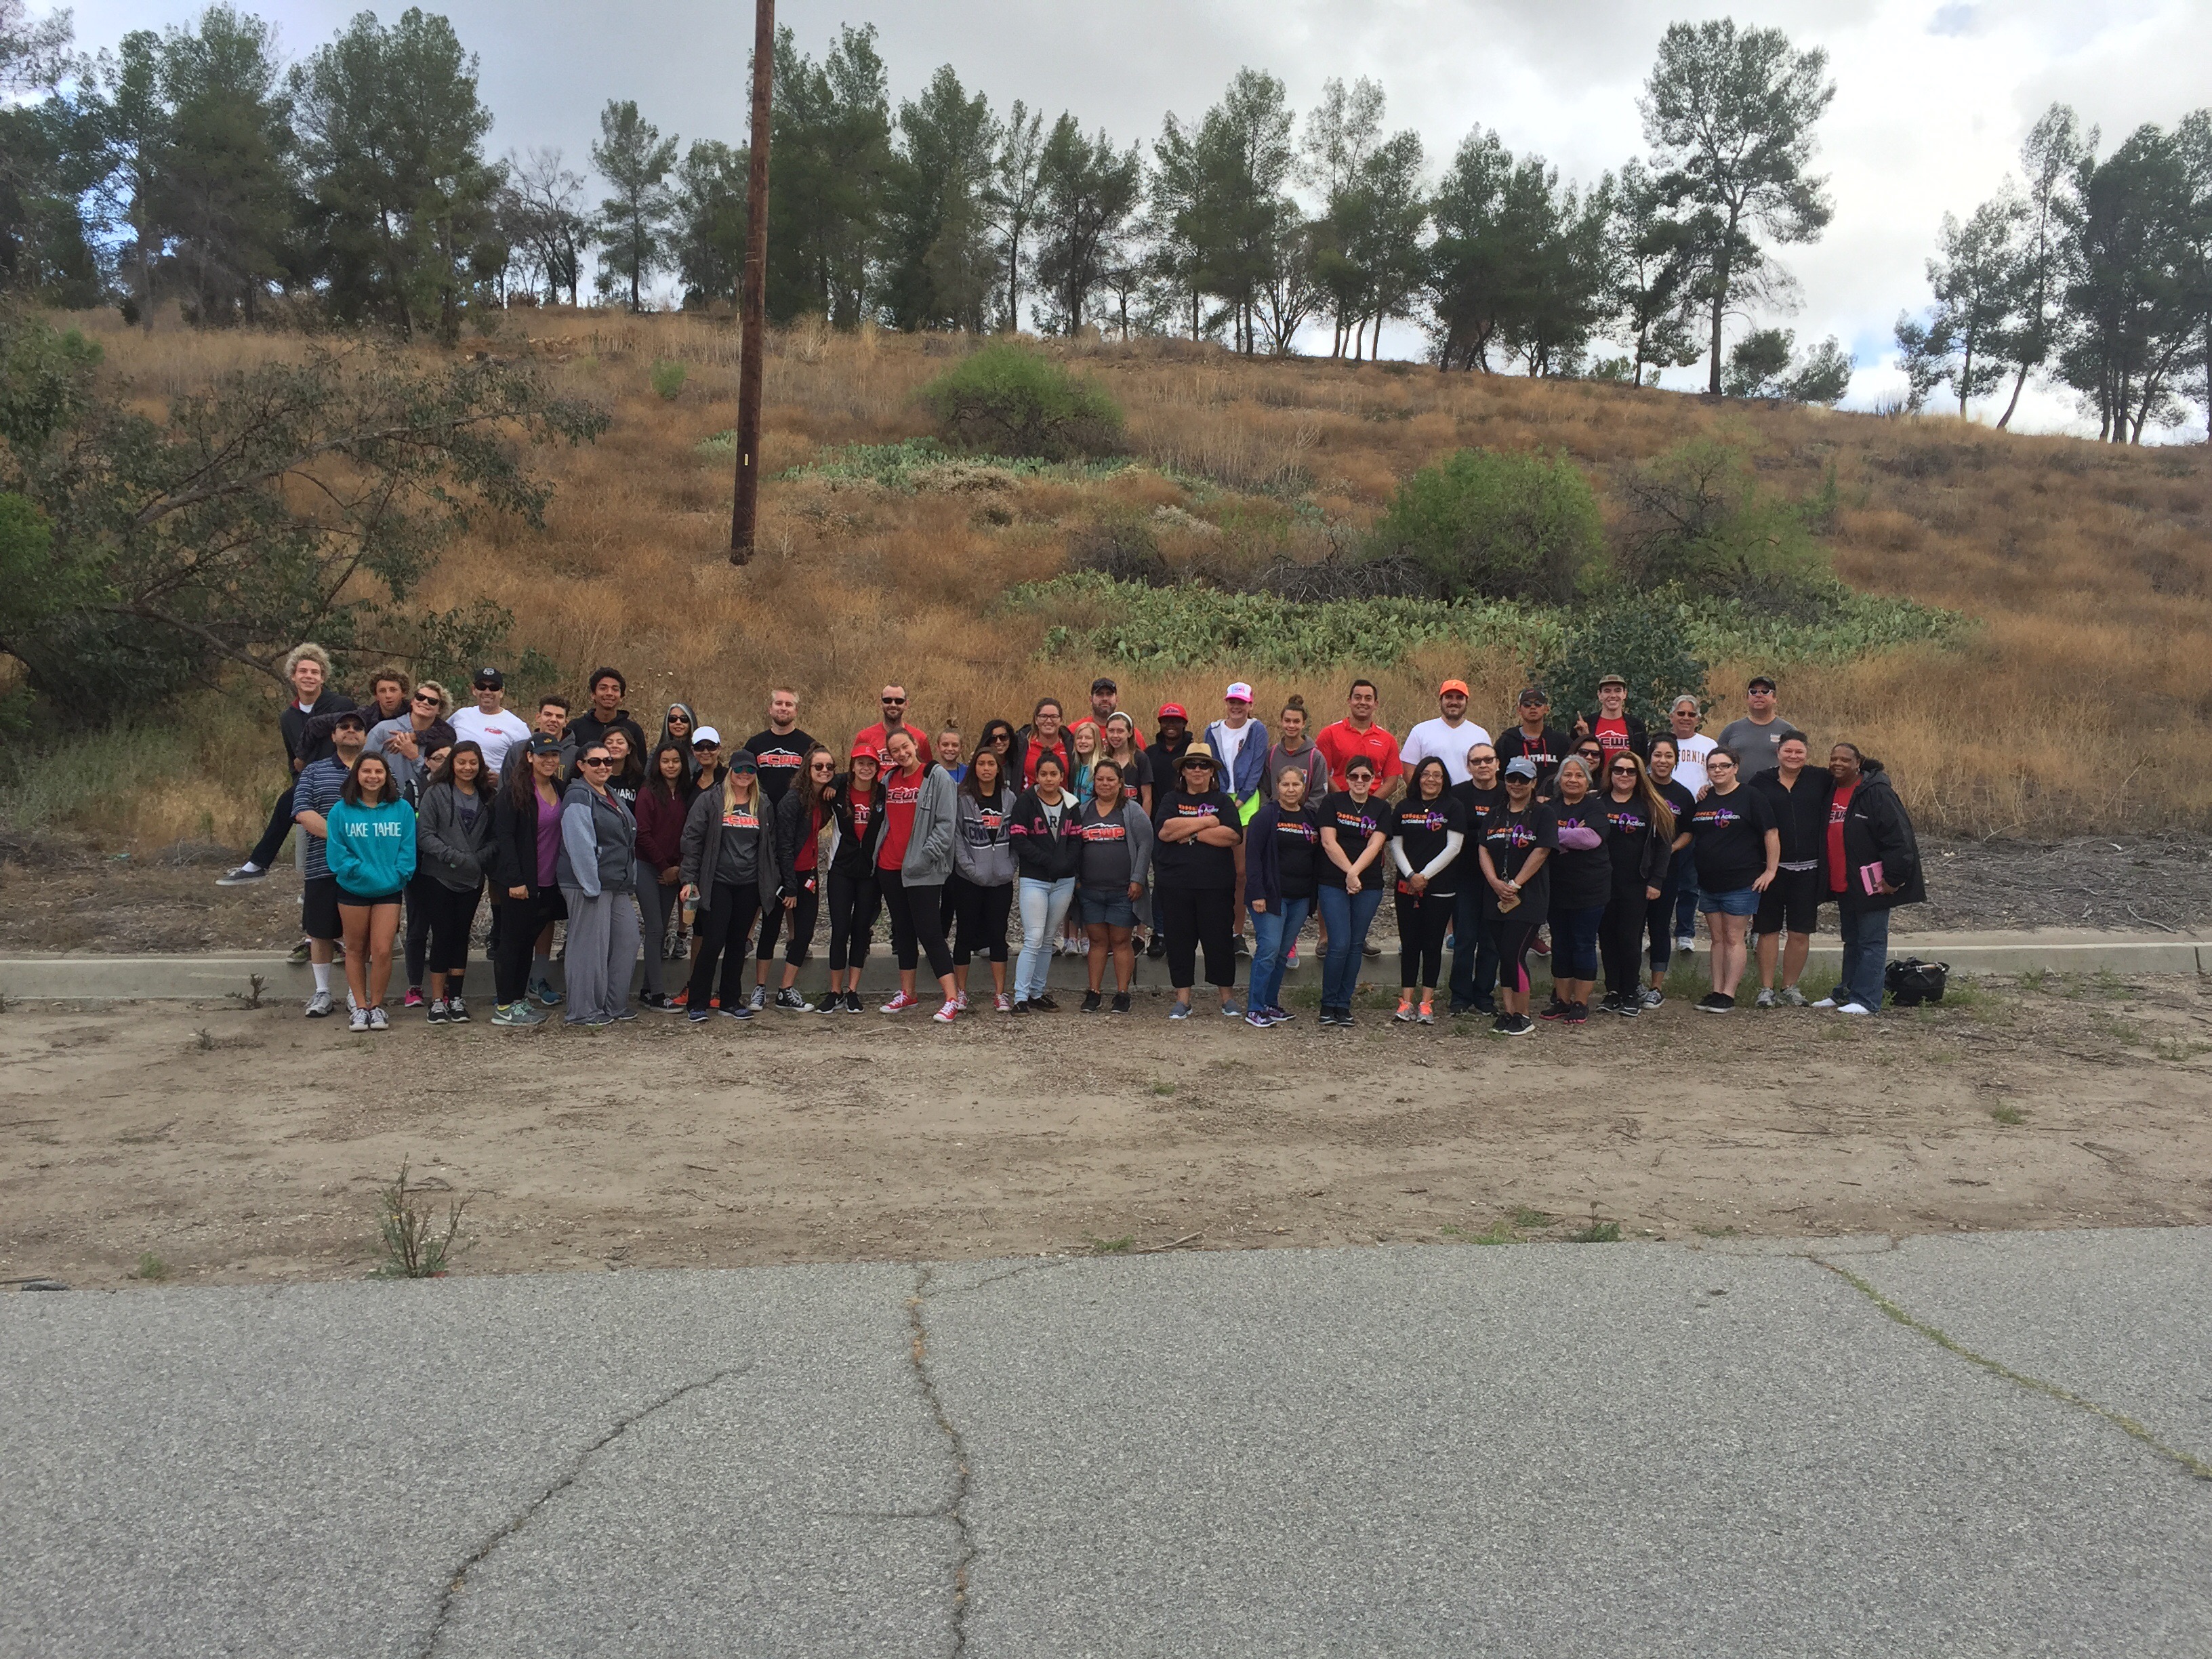 Foothill Partners with Kohl’s Cares to Clean Up Bonelli!